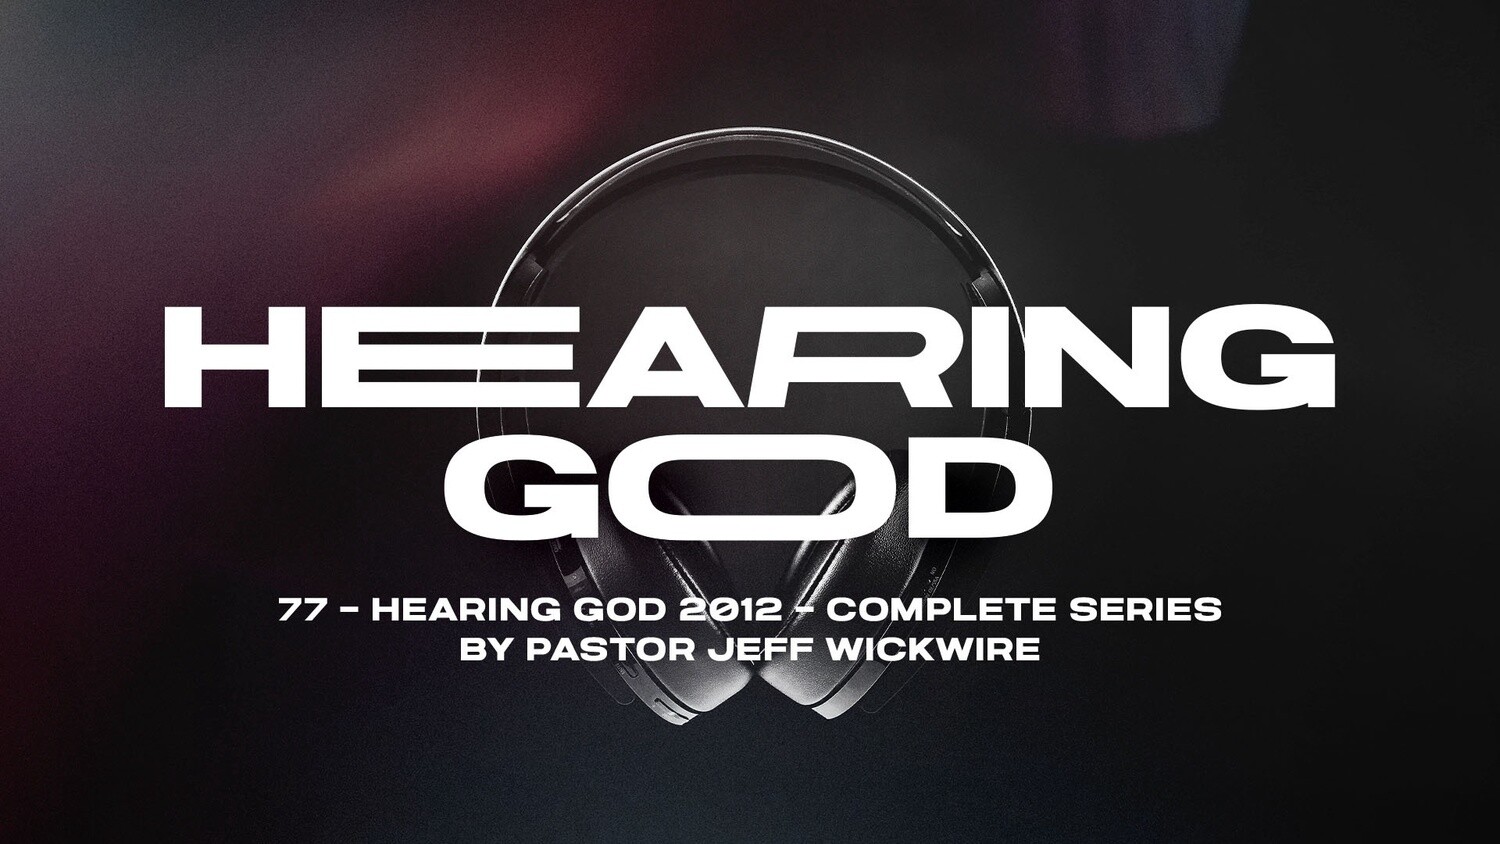 77 - Hearing God 2012 - Complete Series By Pastor Jeff Wickwire